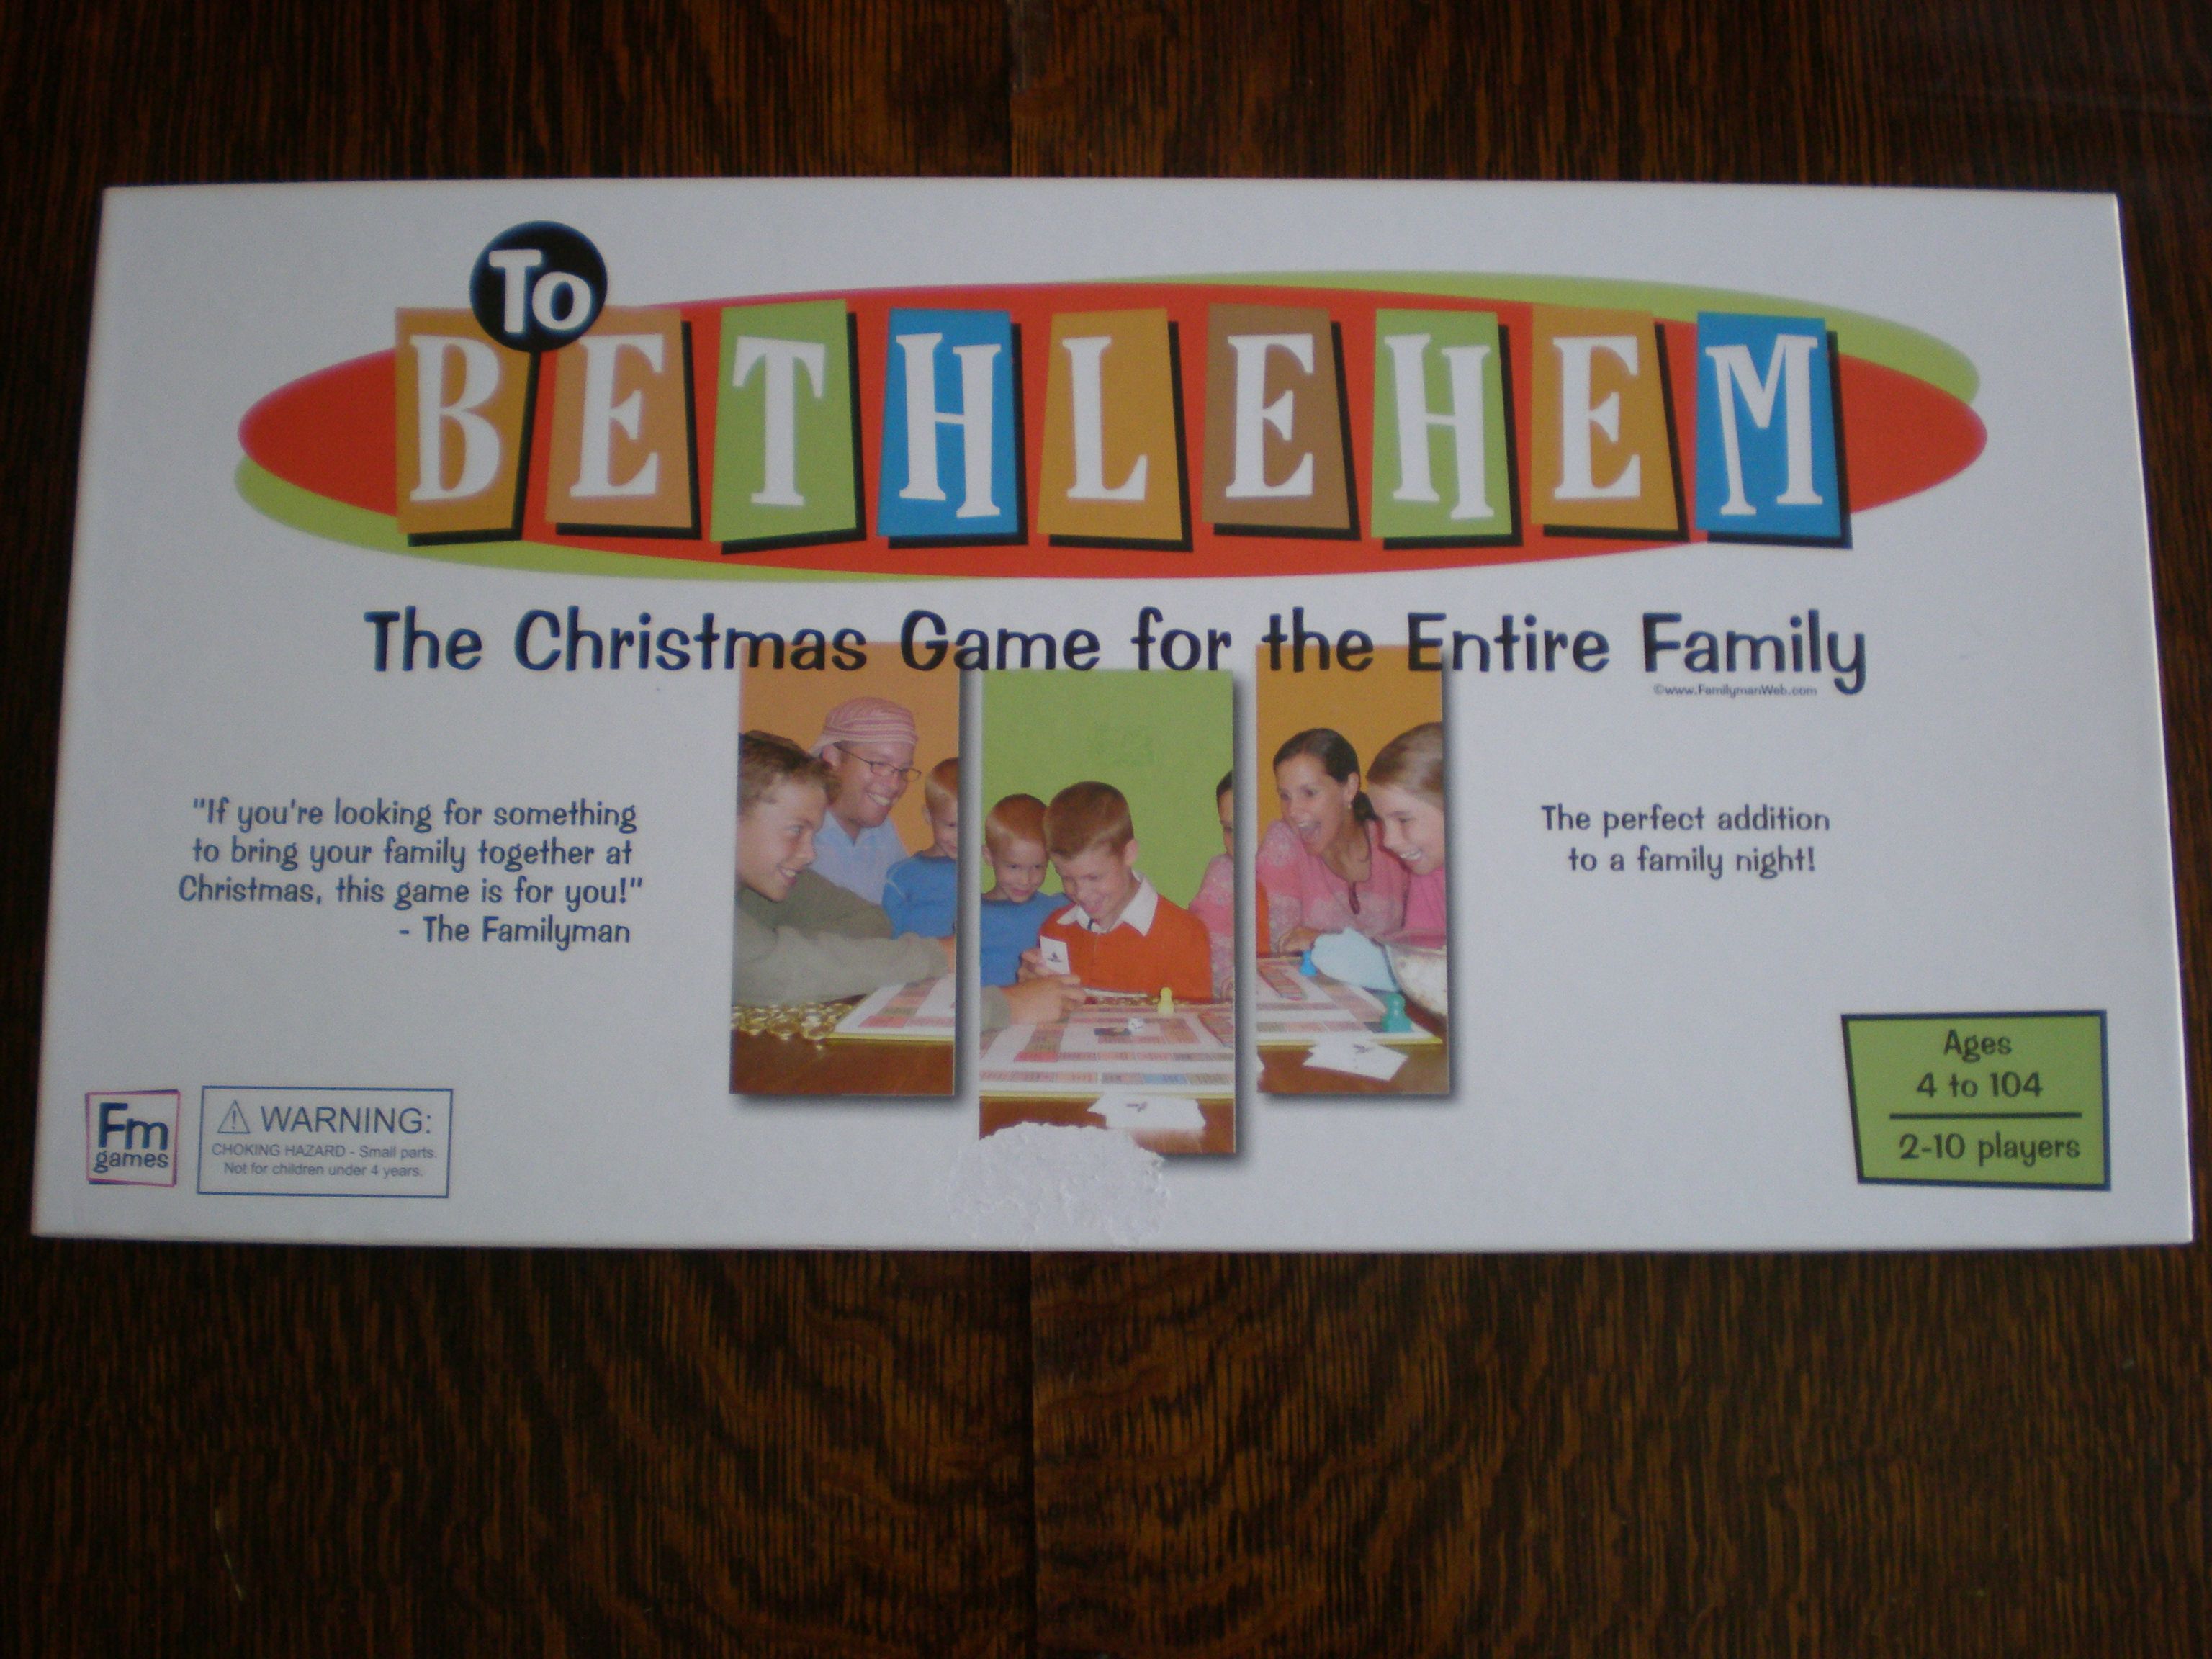 To Bethlehem: The Christmas Game for the Entire Family